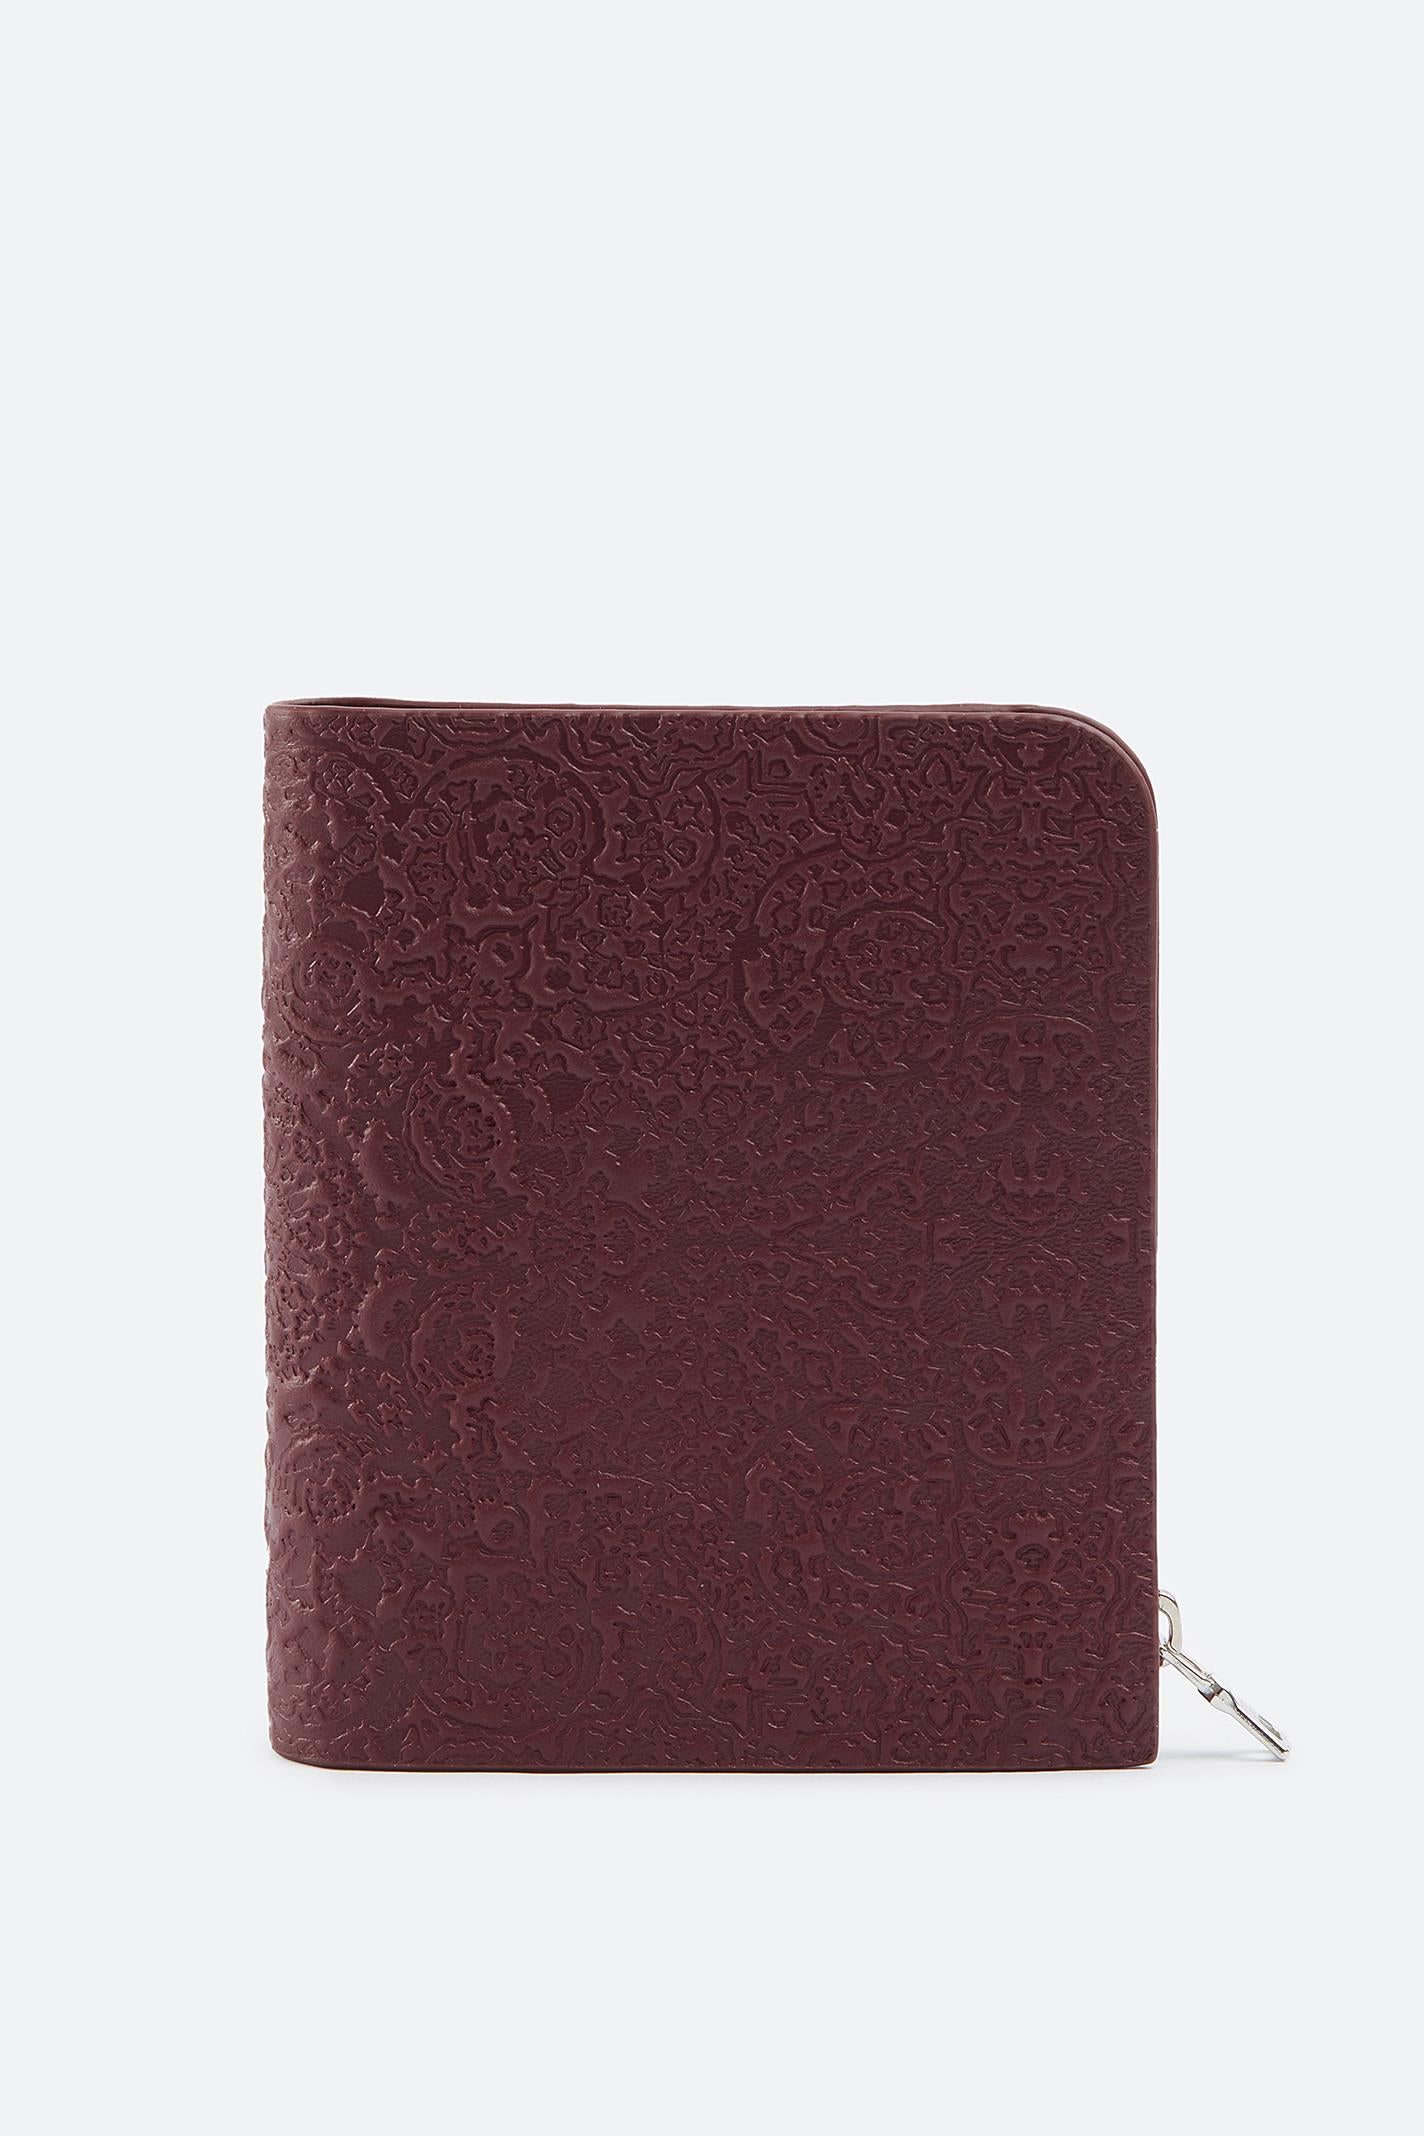 LARGE ZIPPED WALLET 014 